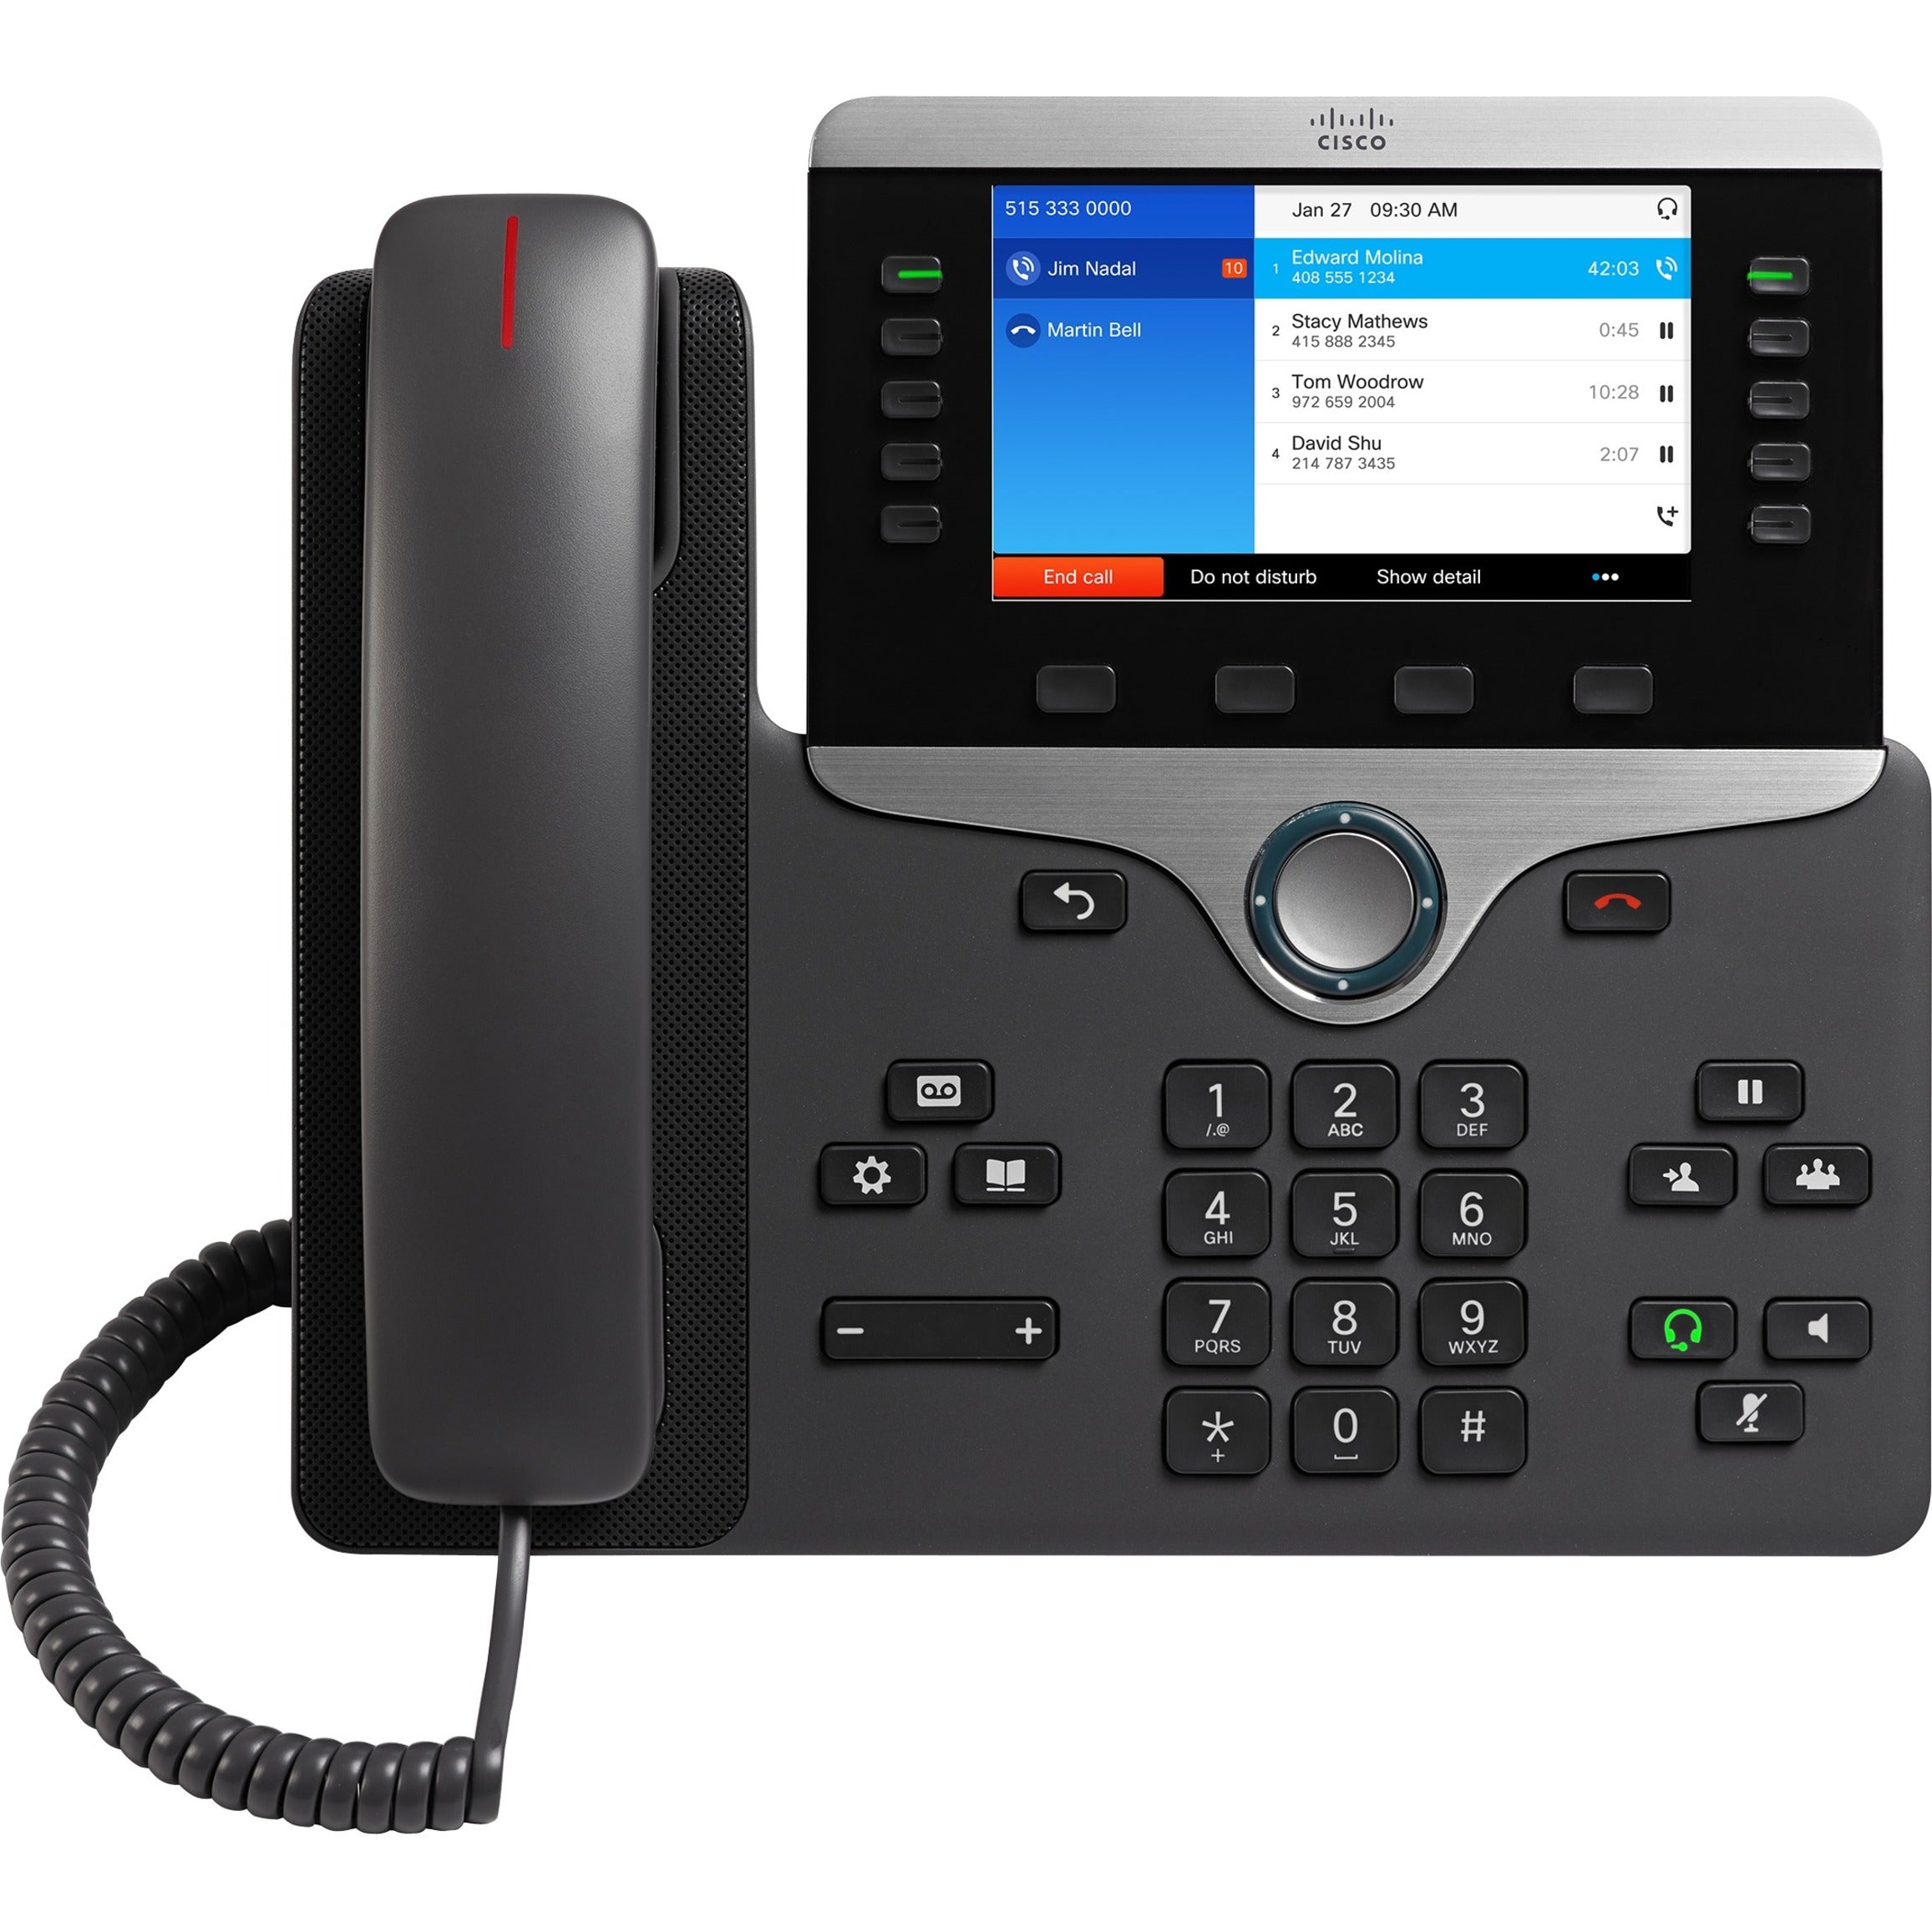 Cisco CP-8841-K9= UC Phone 8841, 5 Color LCD Display, Hands-free, Caller ID, VoIP